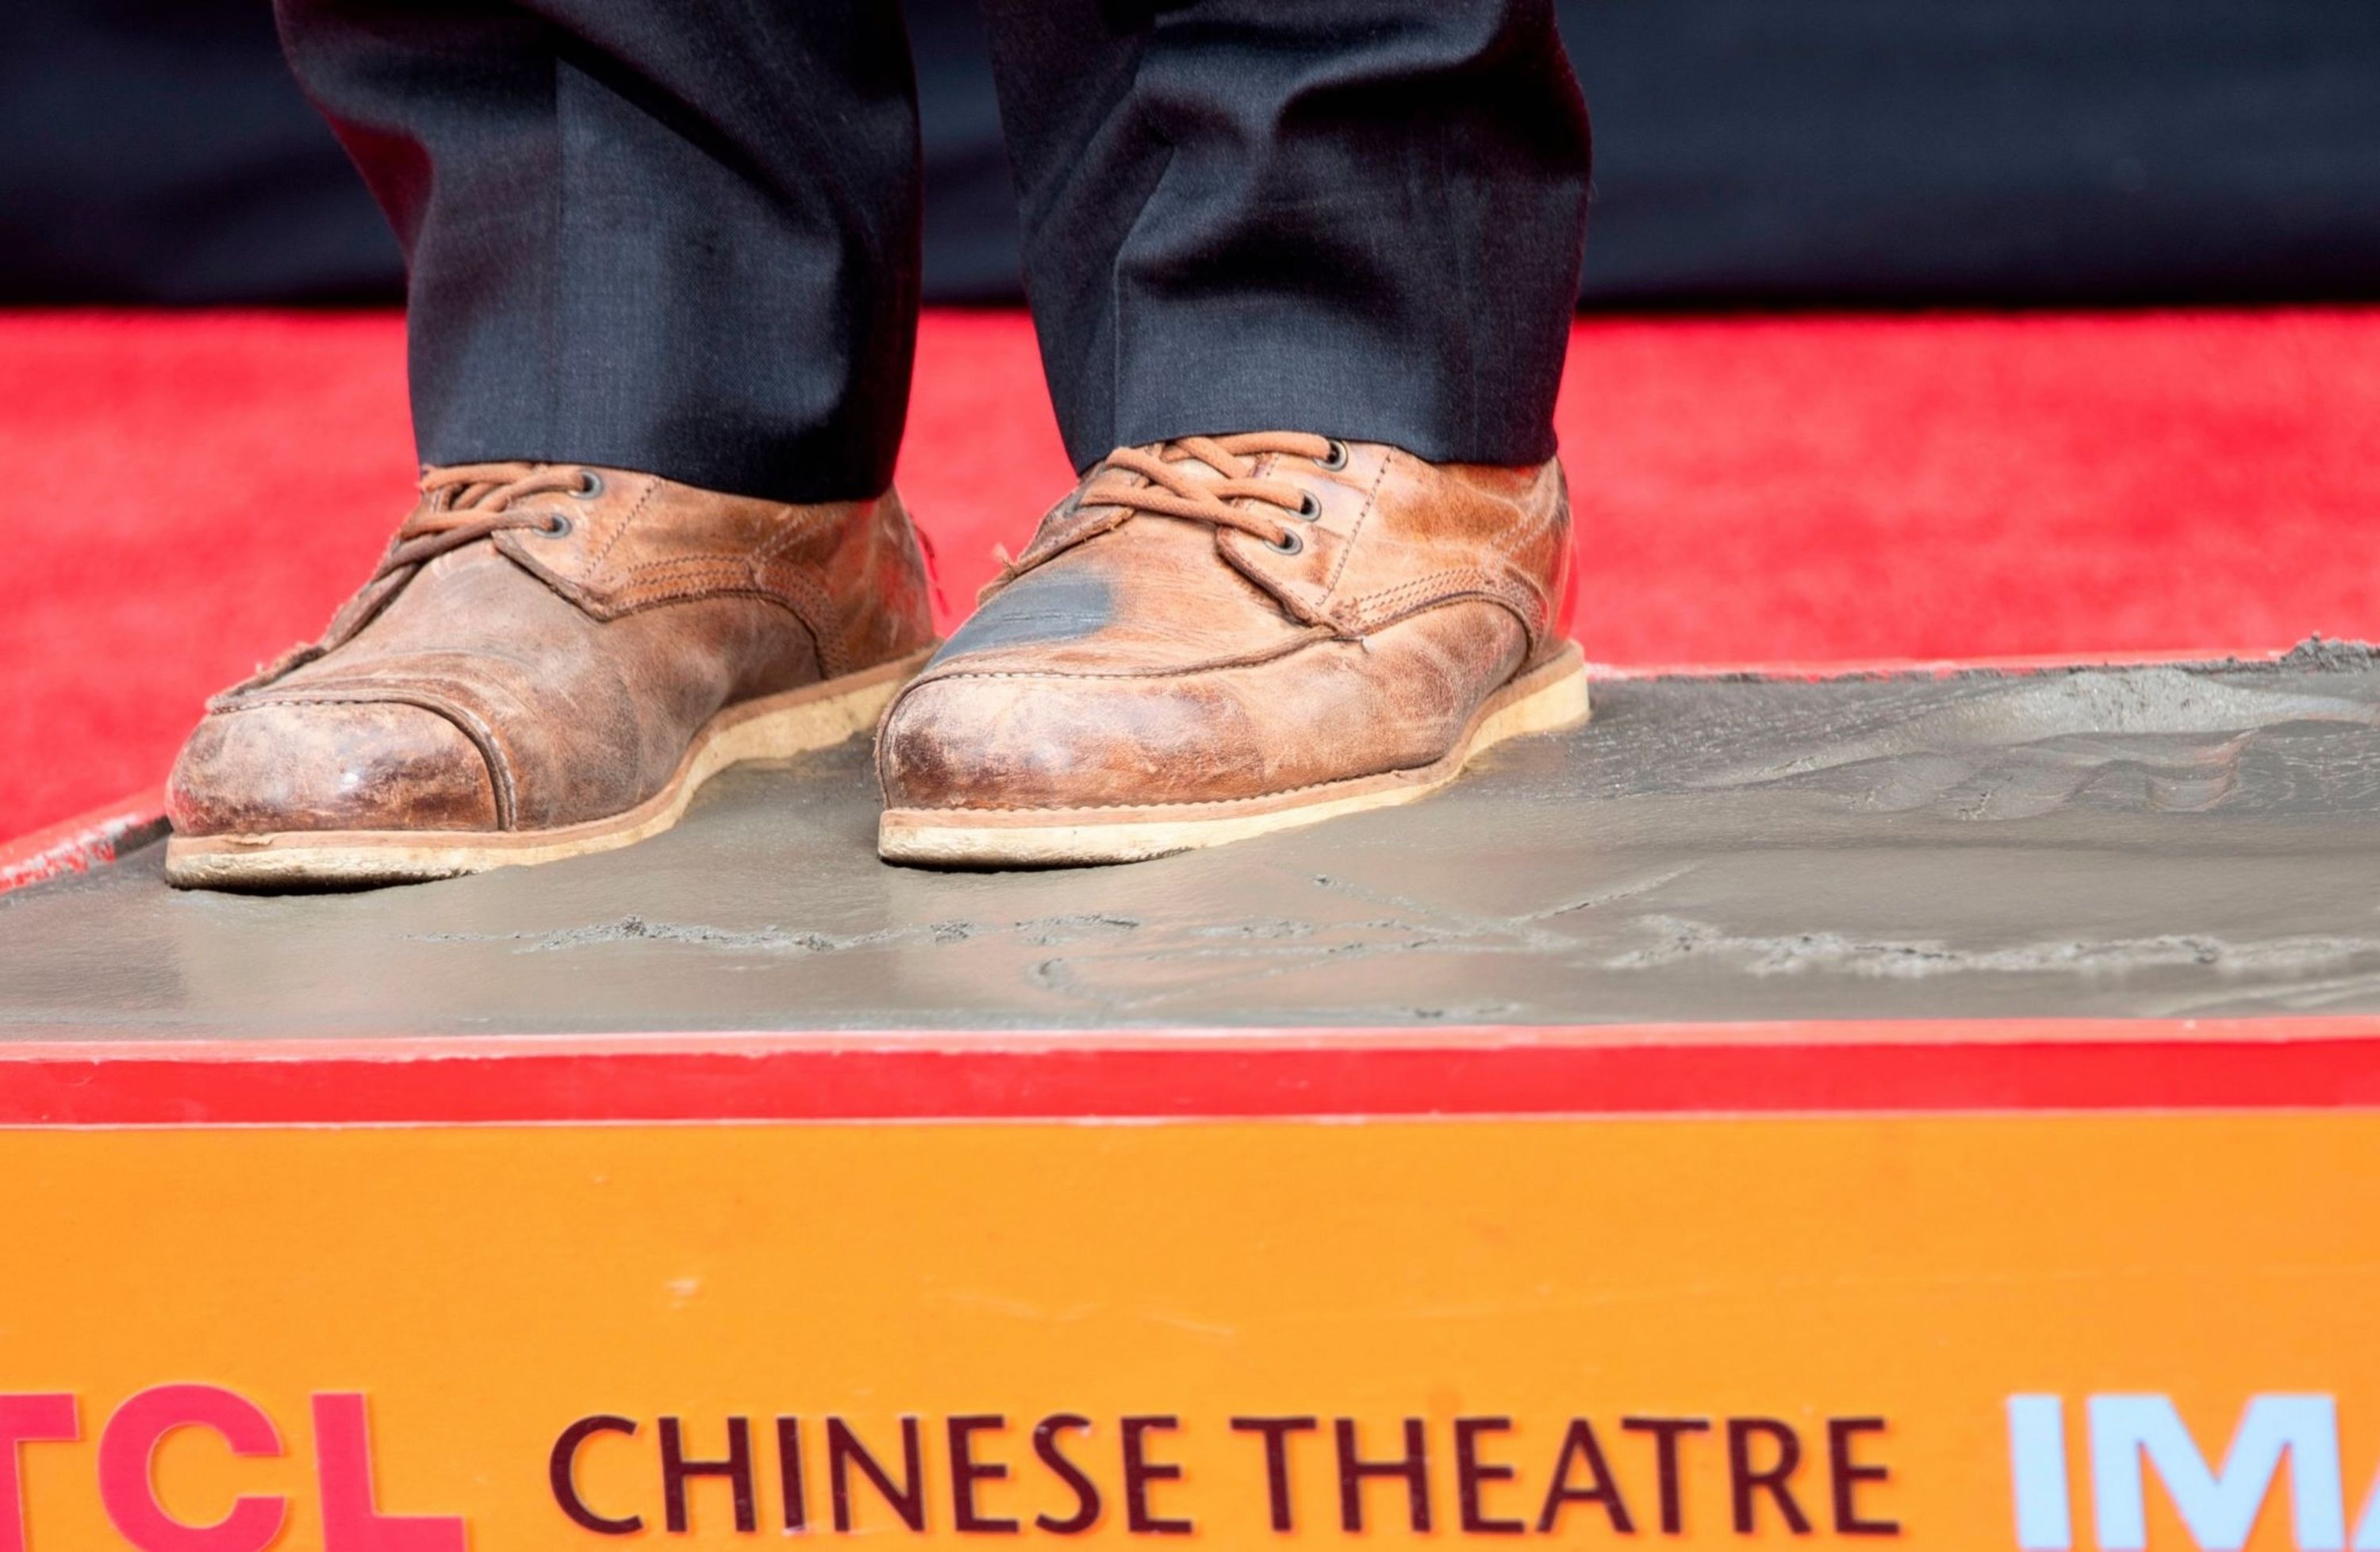 2019-05-14-Hand-and-Foot-Print-Ceremony-At-The-Chinese-Theater-003.jpg